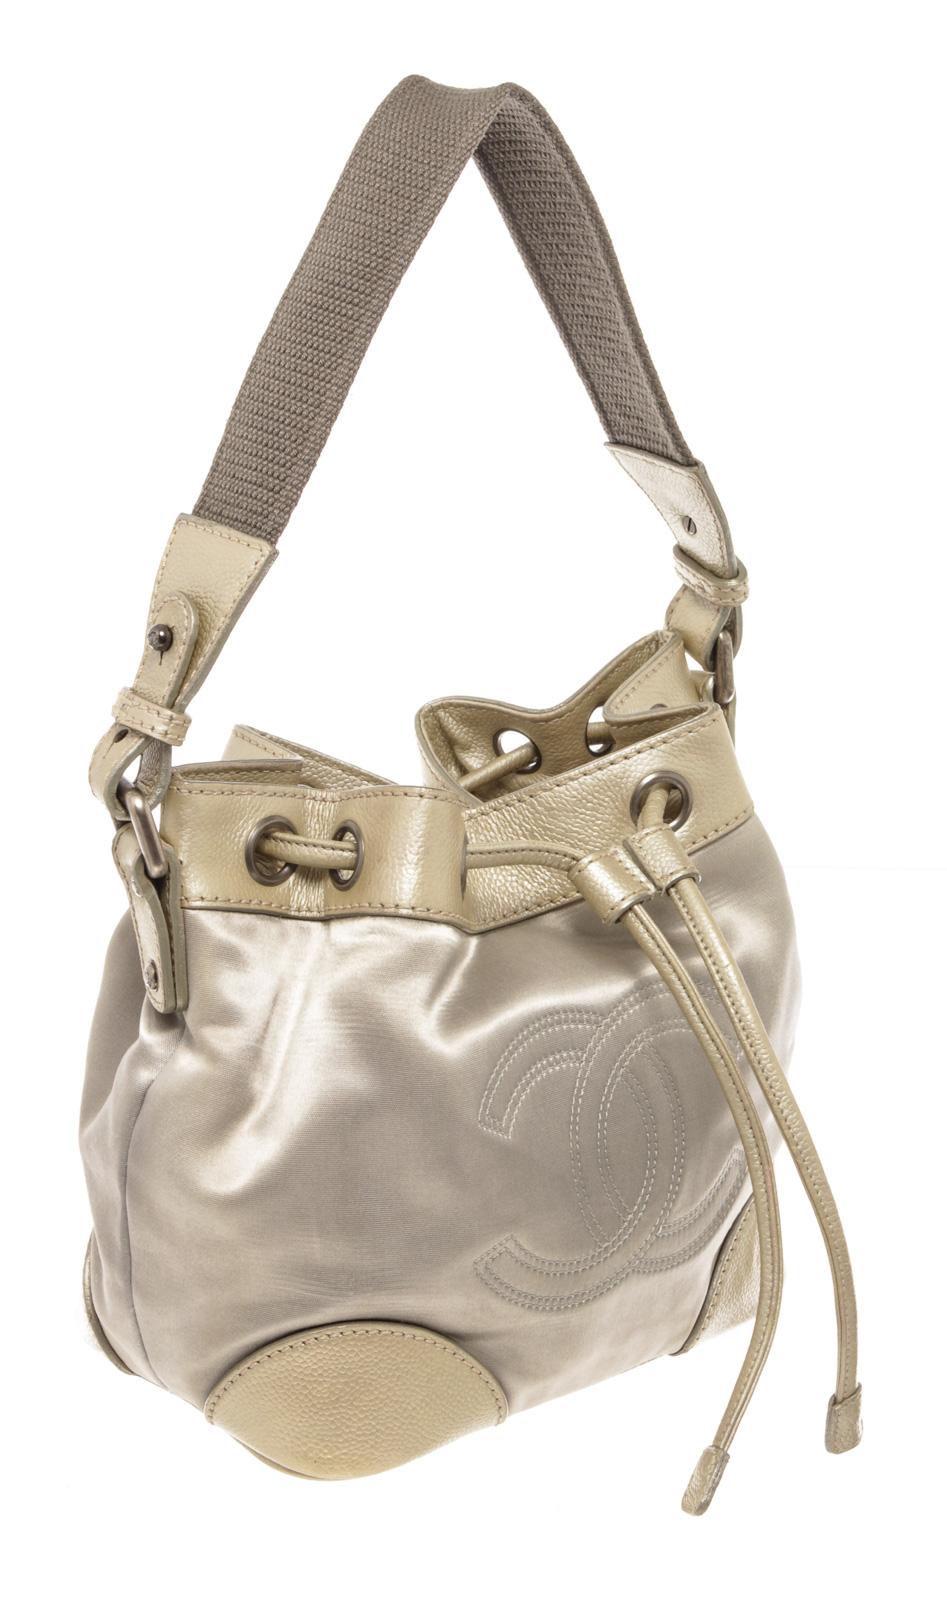 Metallic silver two-tone leather Chanel Vintage CC Drawstring bucket bag with silver-tone hardware, single leather top handle, an interlocking CC logo stitched at front, protective feet at base, drawsting closure at top that will open to beige